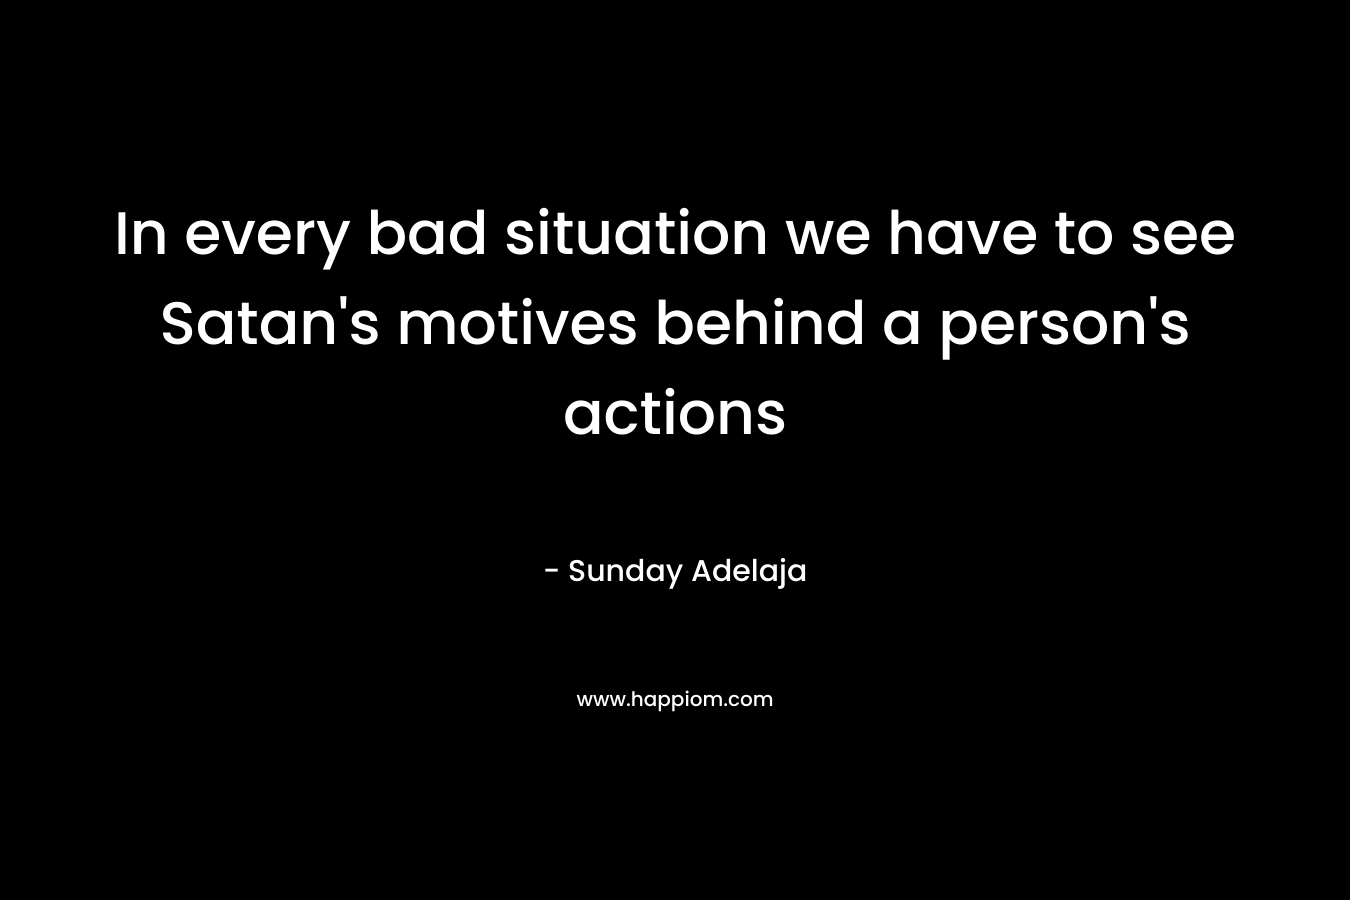 In every bad situation we have to see Satan’s motives behind a person’s actions – Sunday Adelaja